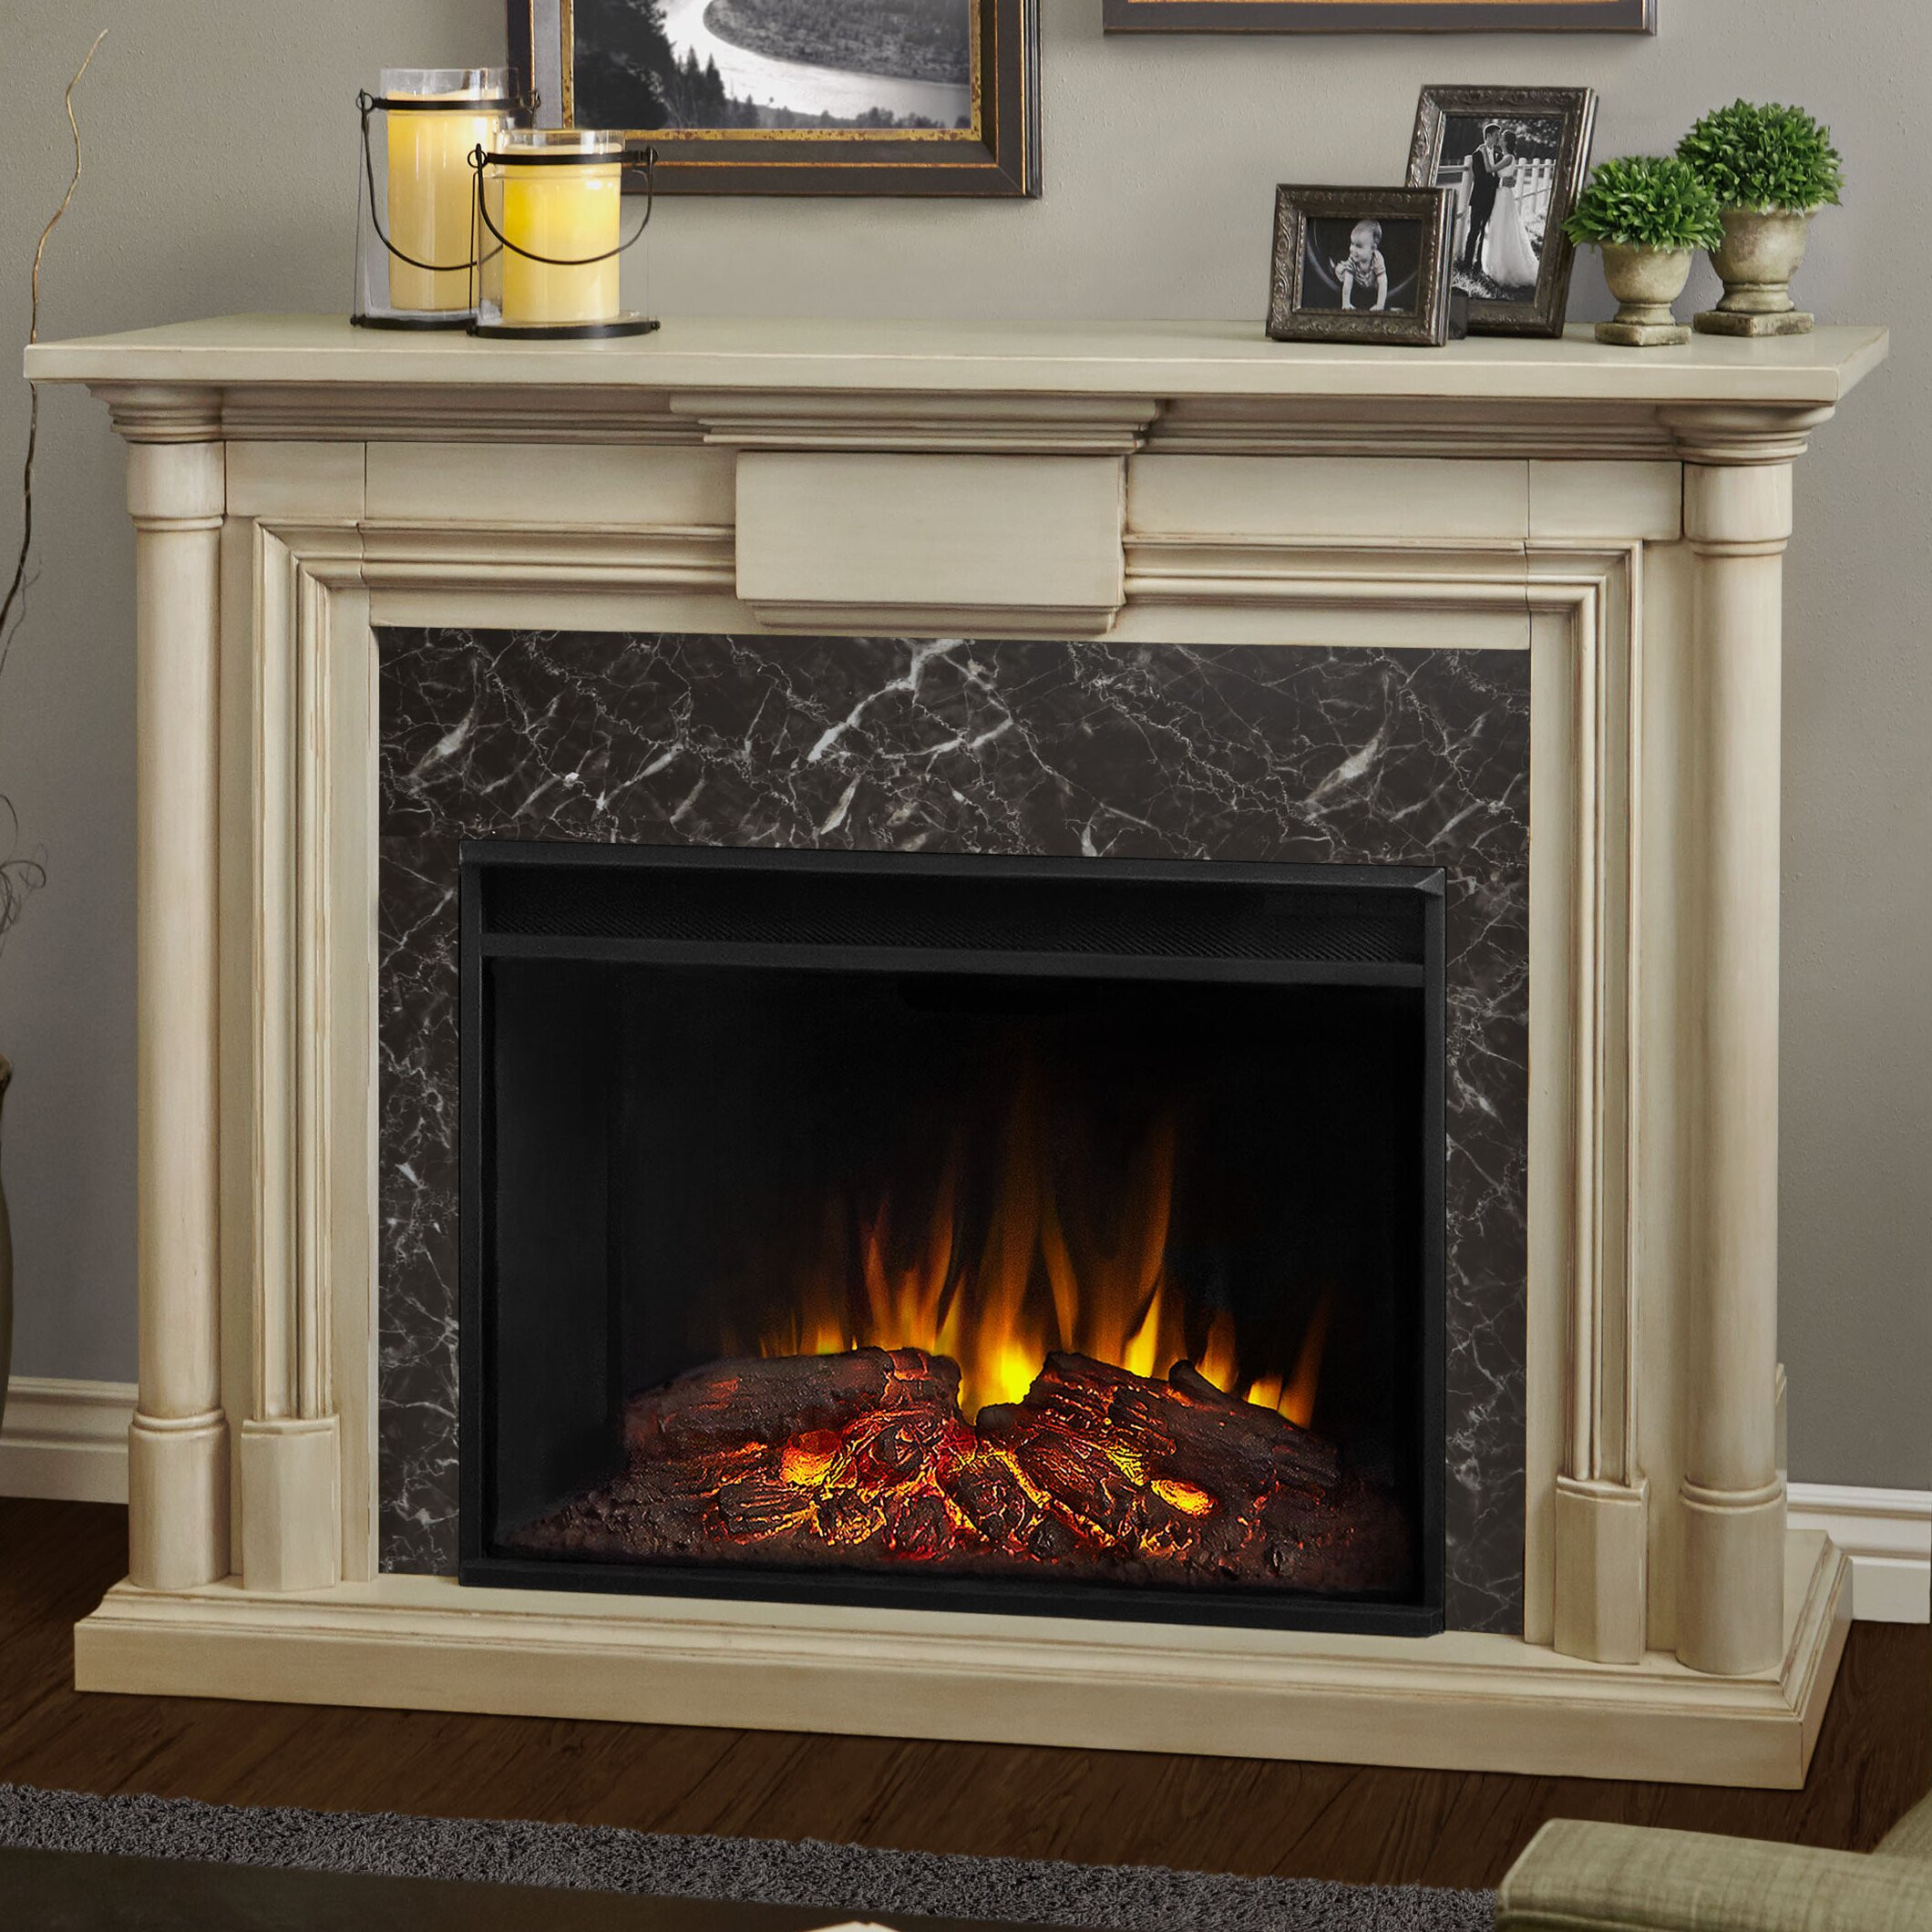 Real Flame Electric Fireplace Reviews
 Real Flame Maxwell Grand Electric Fireplace & Reviews